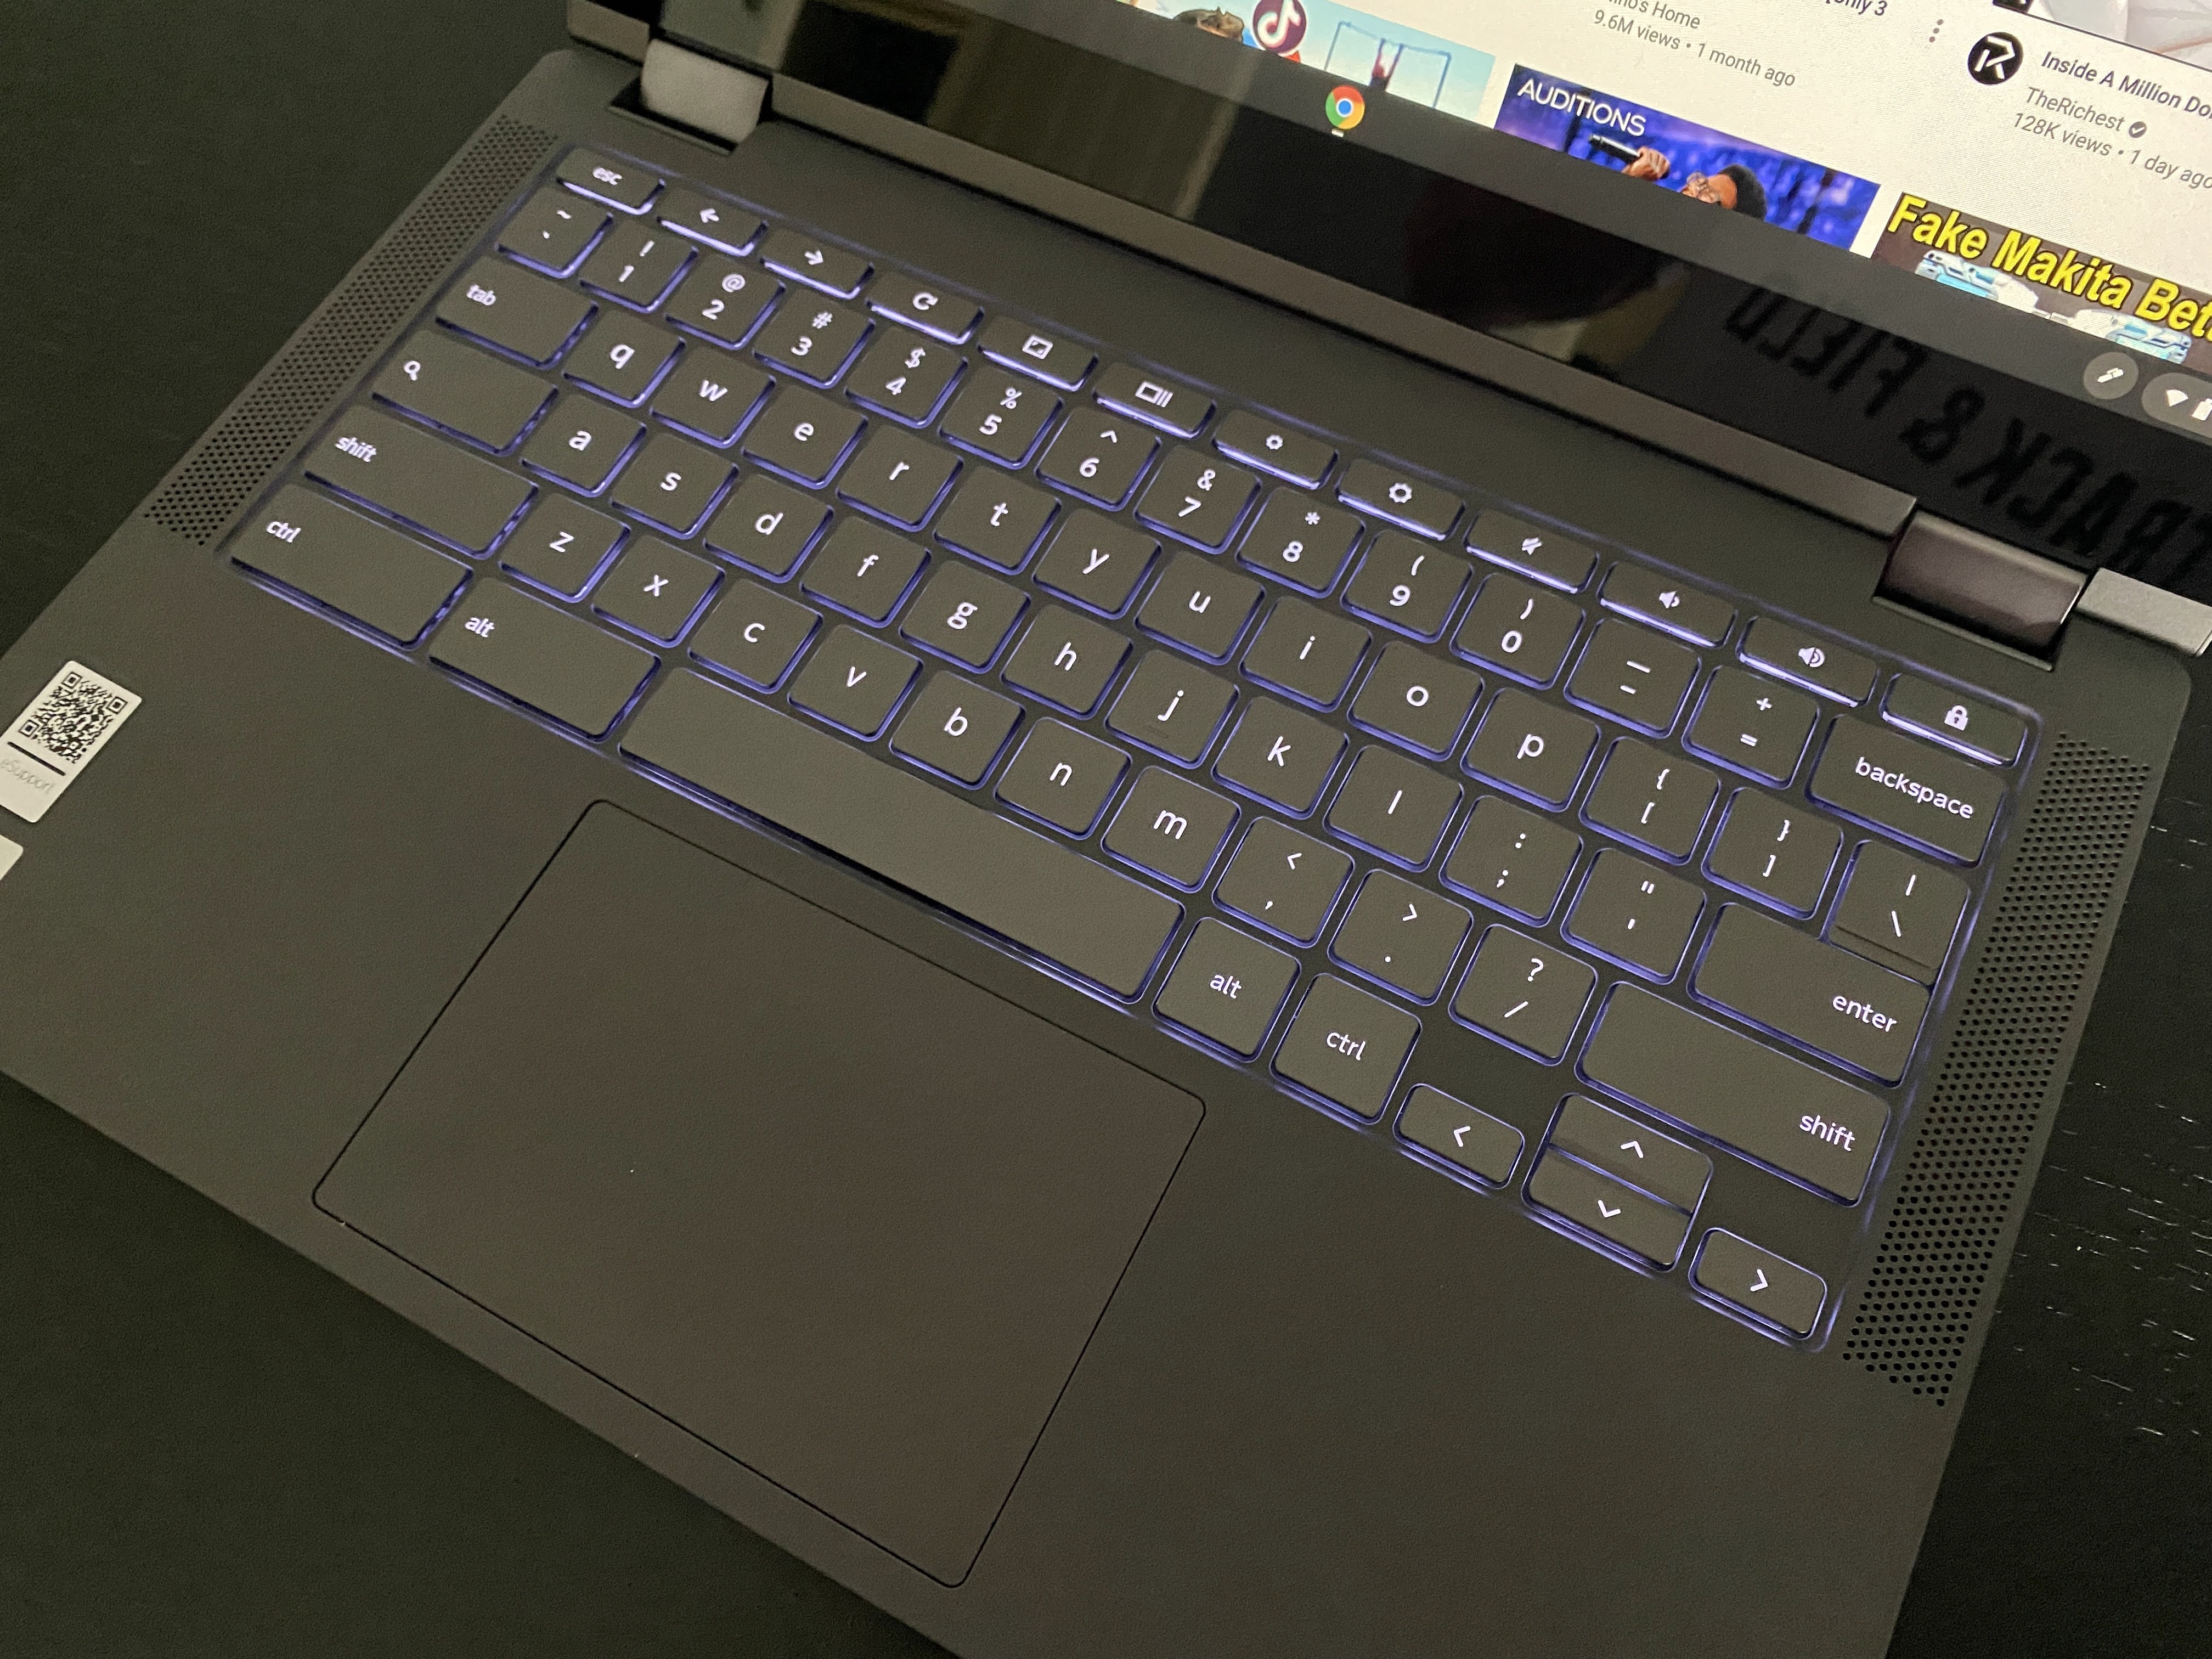 Lenovo Flex 5 Chromebook: Hands-on and first impressions